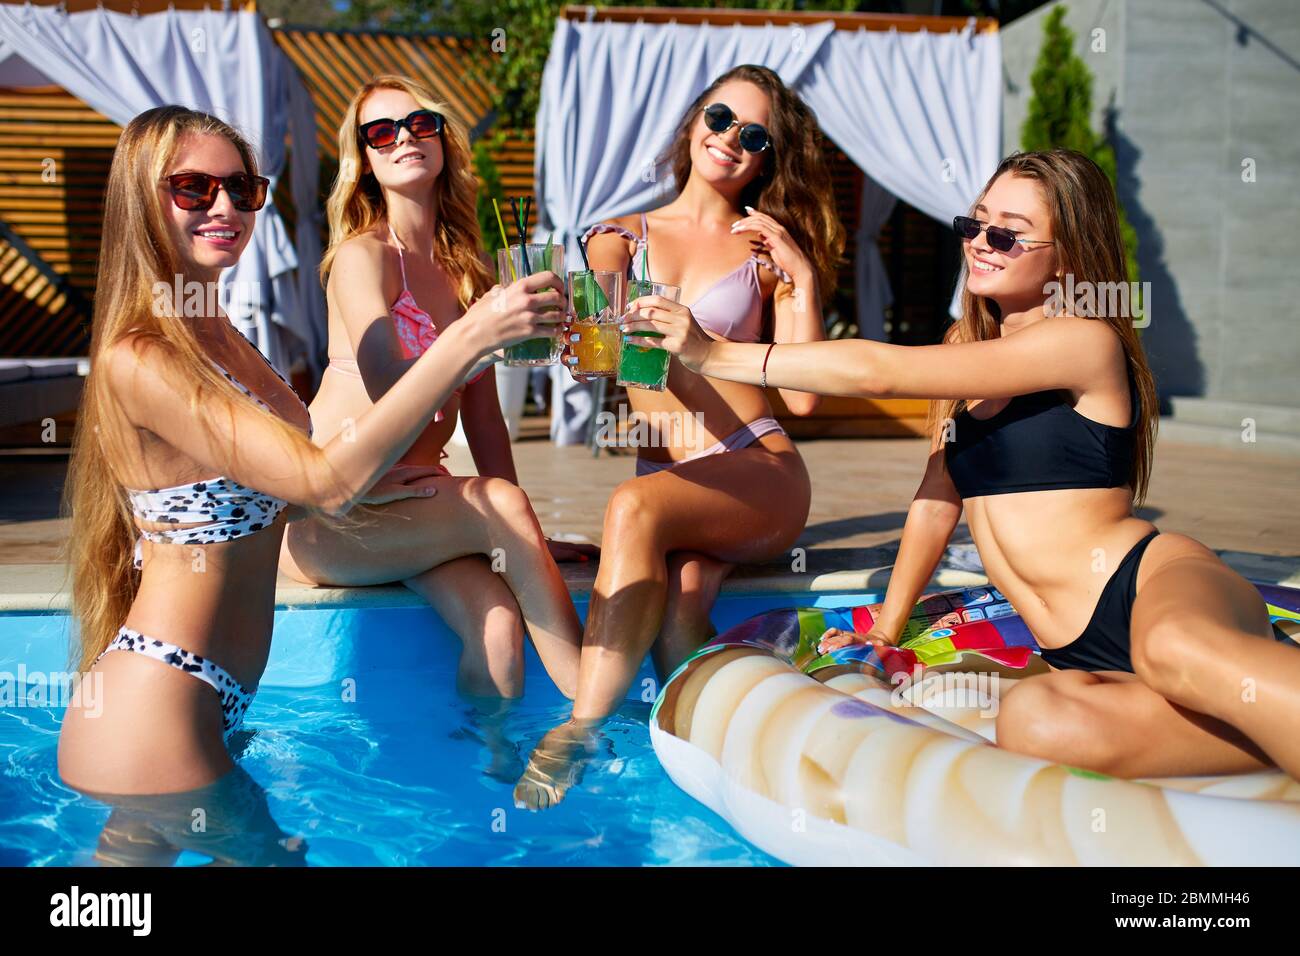 Happy attractive women in bikini have fun on poolside summer party drinking  fresh colorful cocktails sitting by the swimming pool. Female friends in  Stock Photo - Alamy